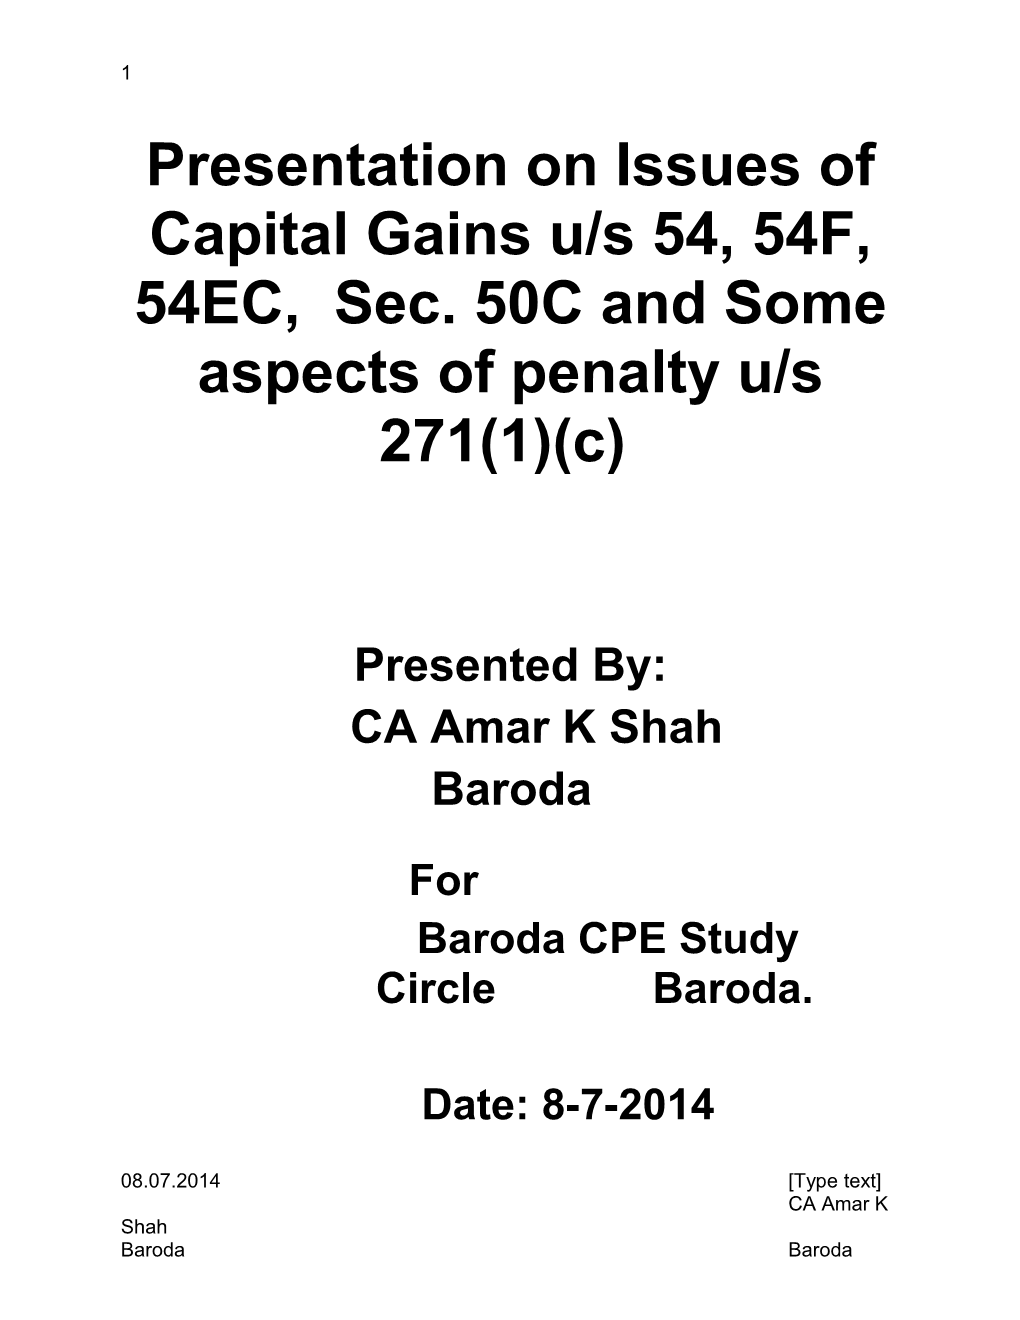 Presentation on Issues of Capital Gains U/S 54, 54F, 54EC, Sec. 50C and Some Aspects Of